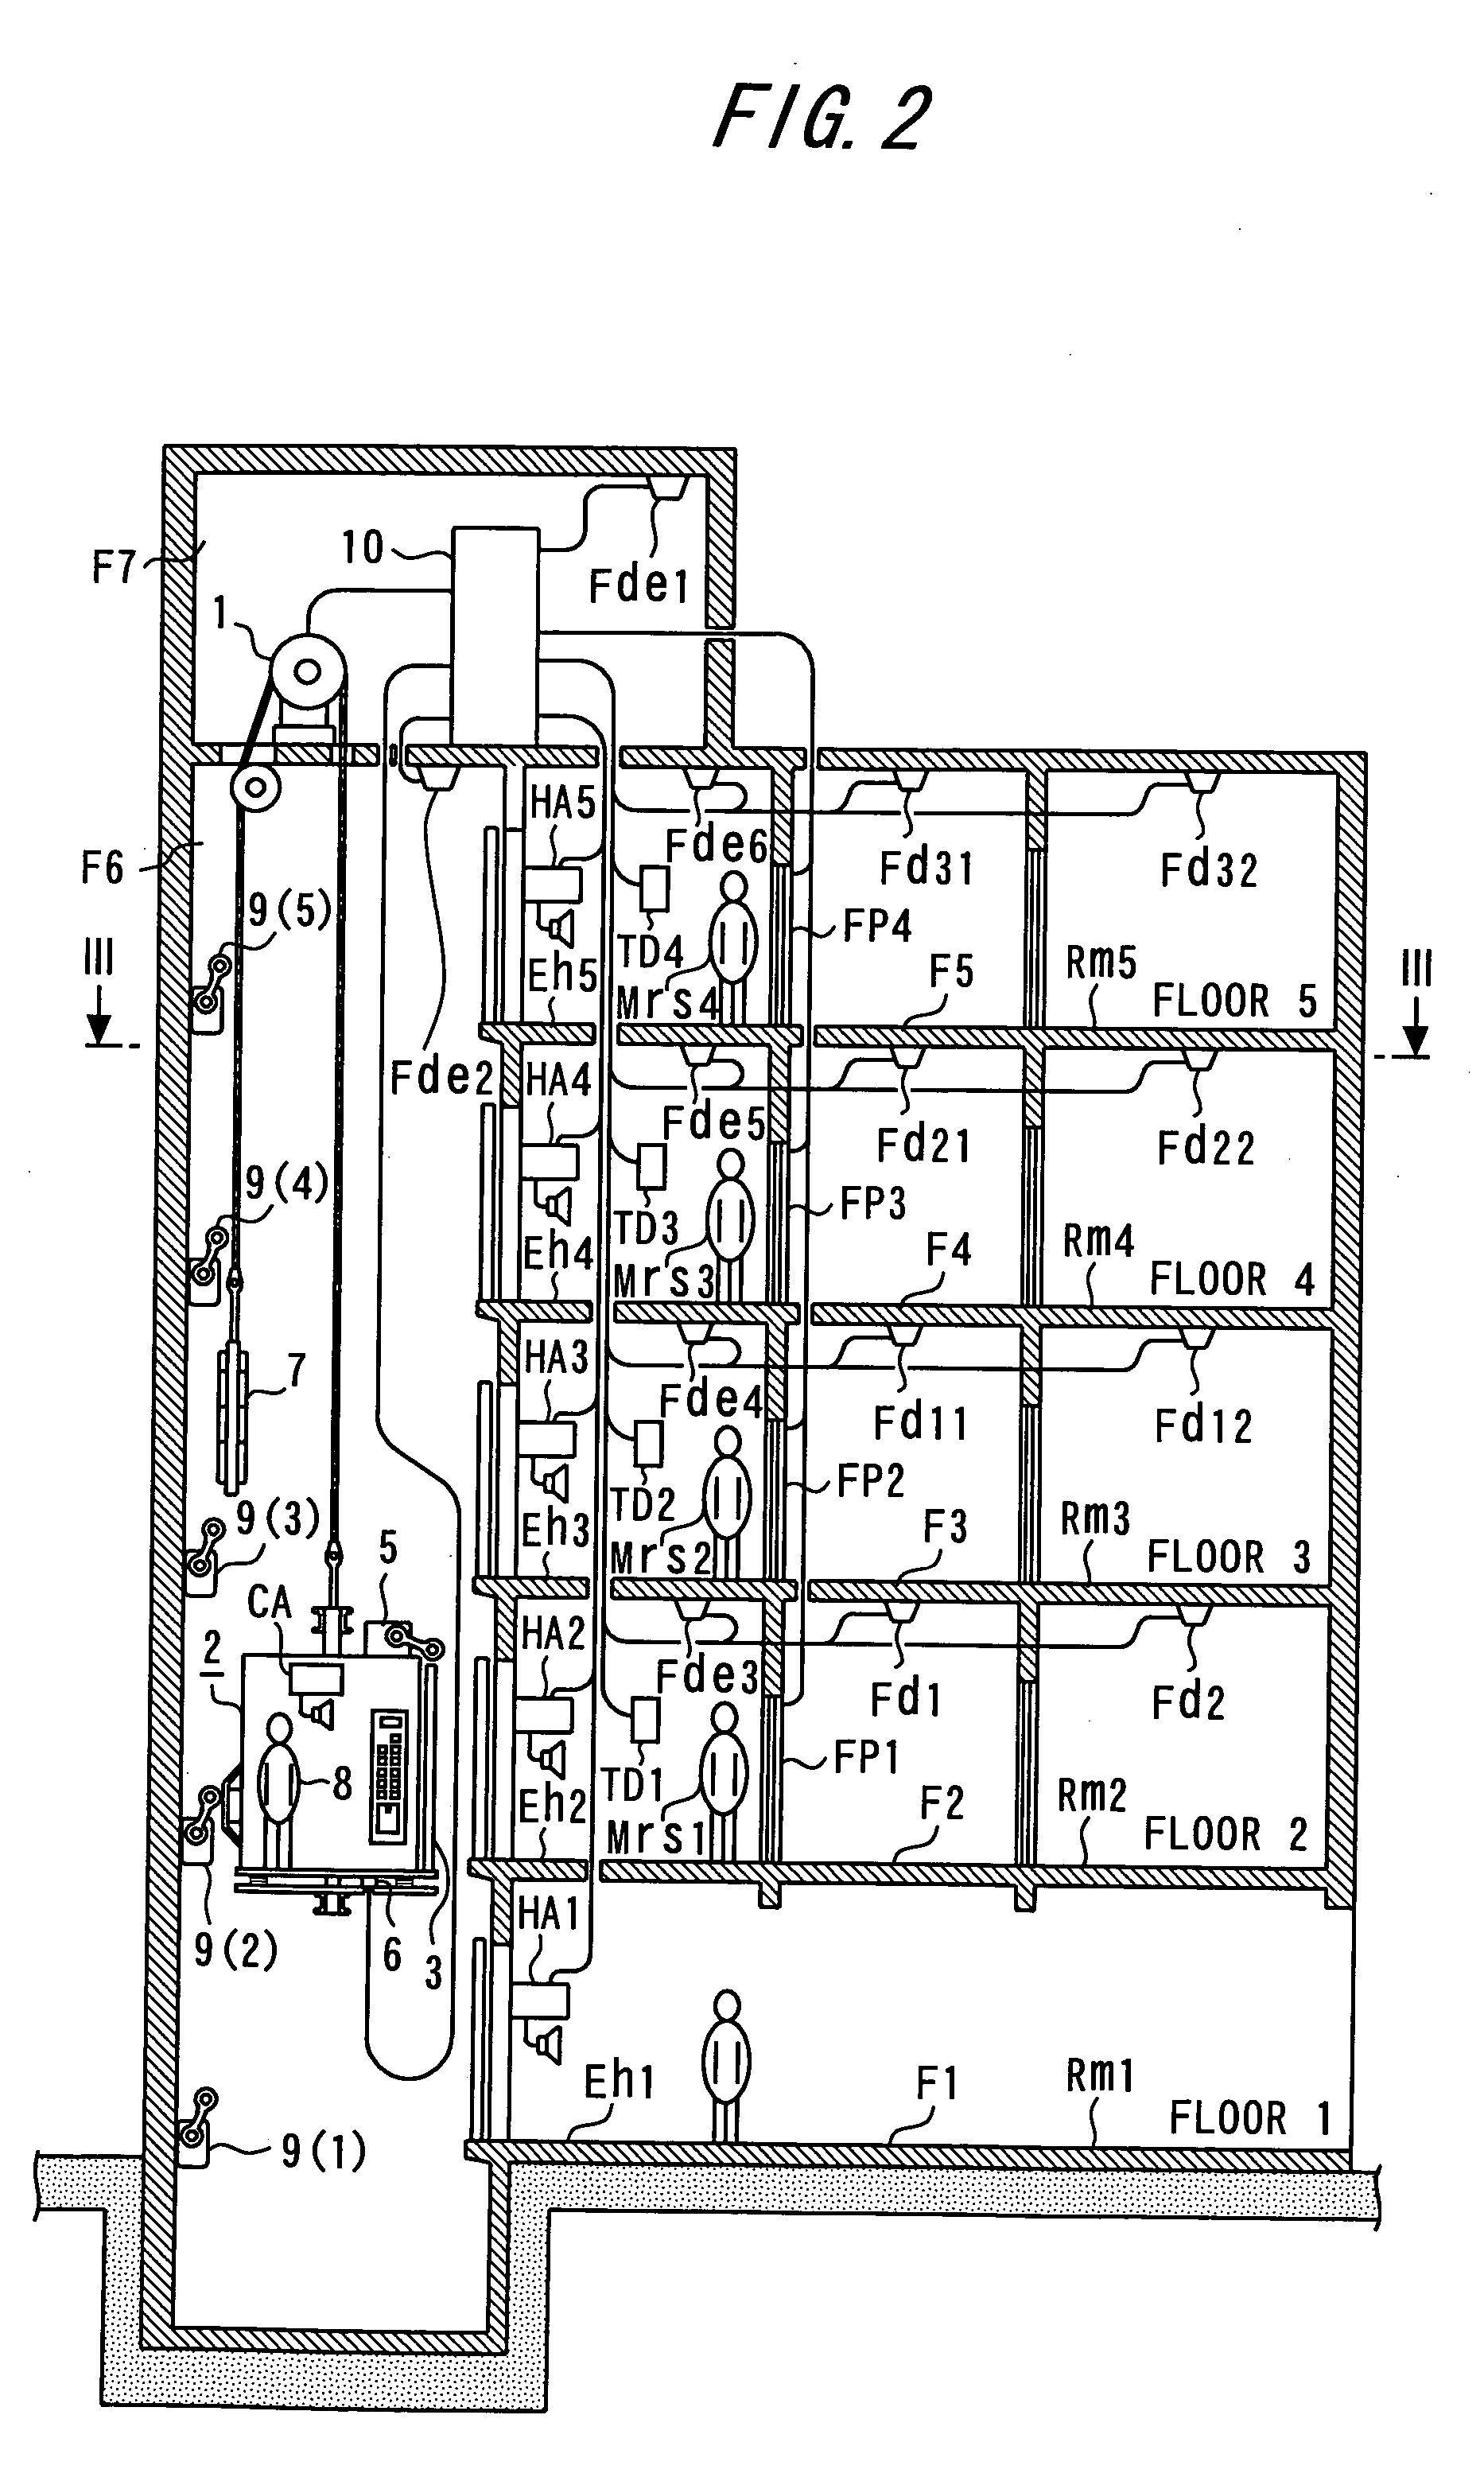 Fire control system of elevator